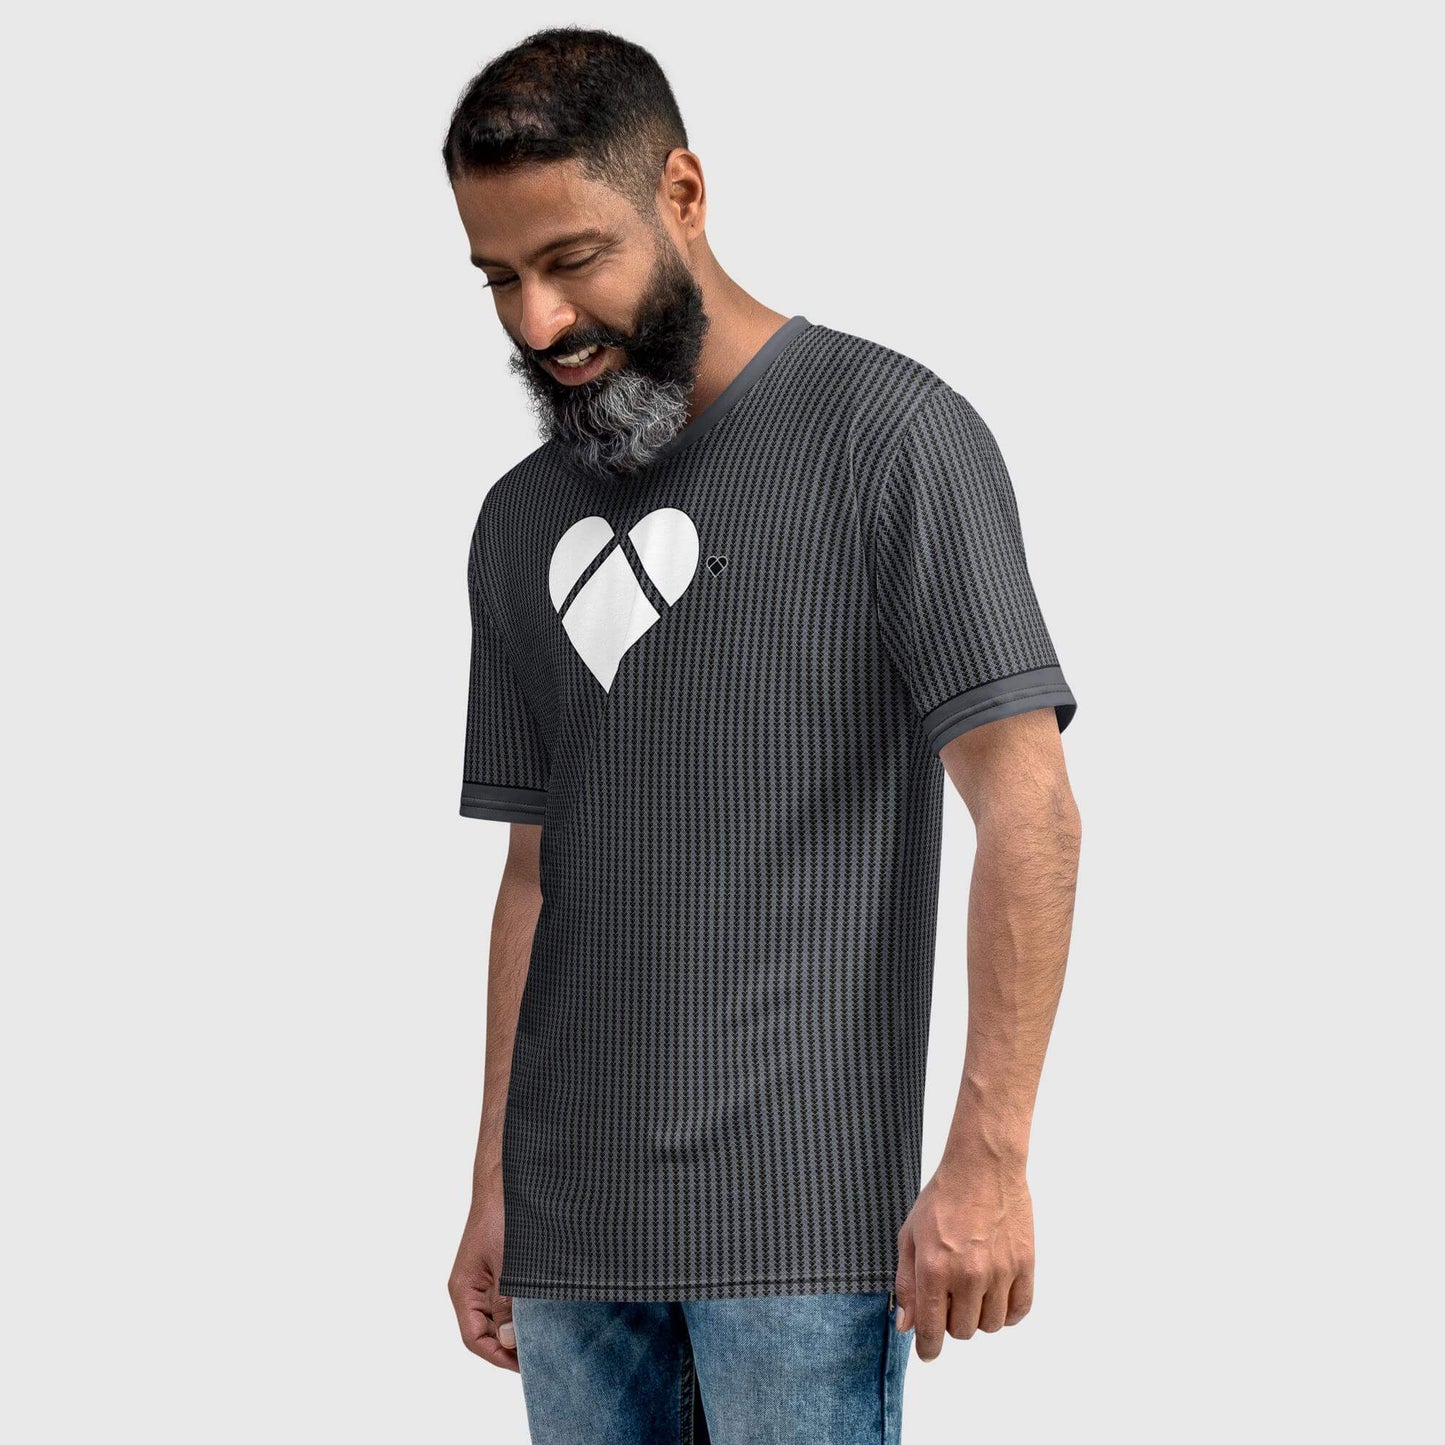 Black shirt with white heart and Dualshade lovogram pattern for men, male model